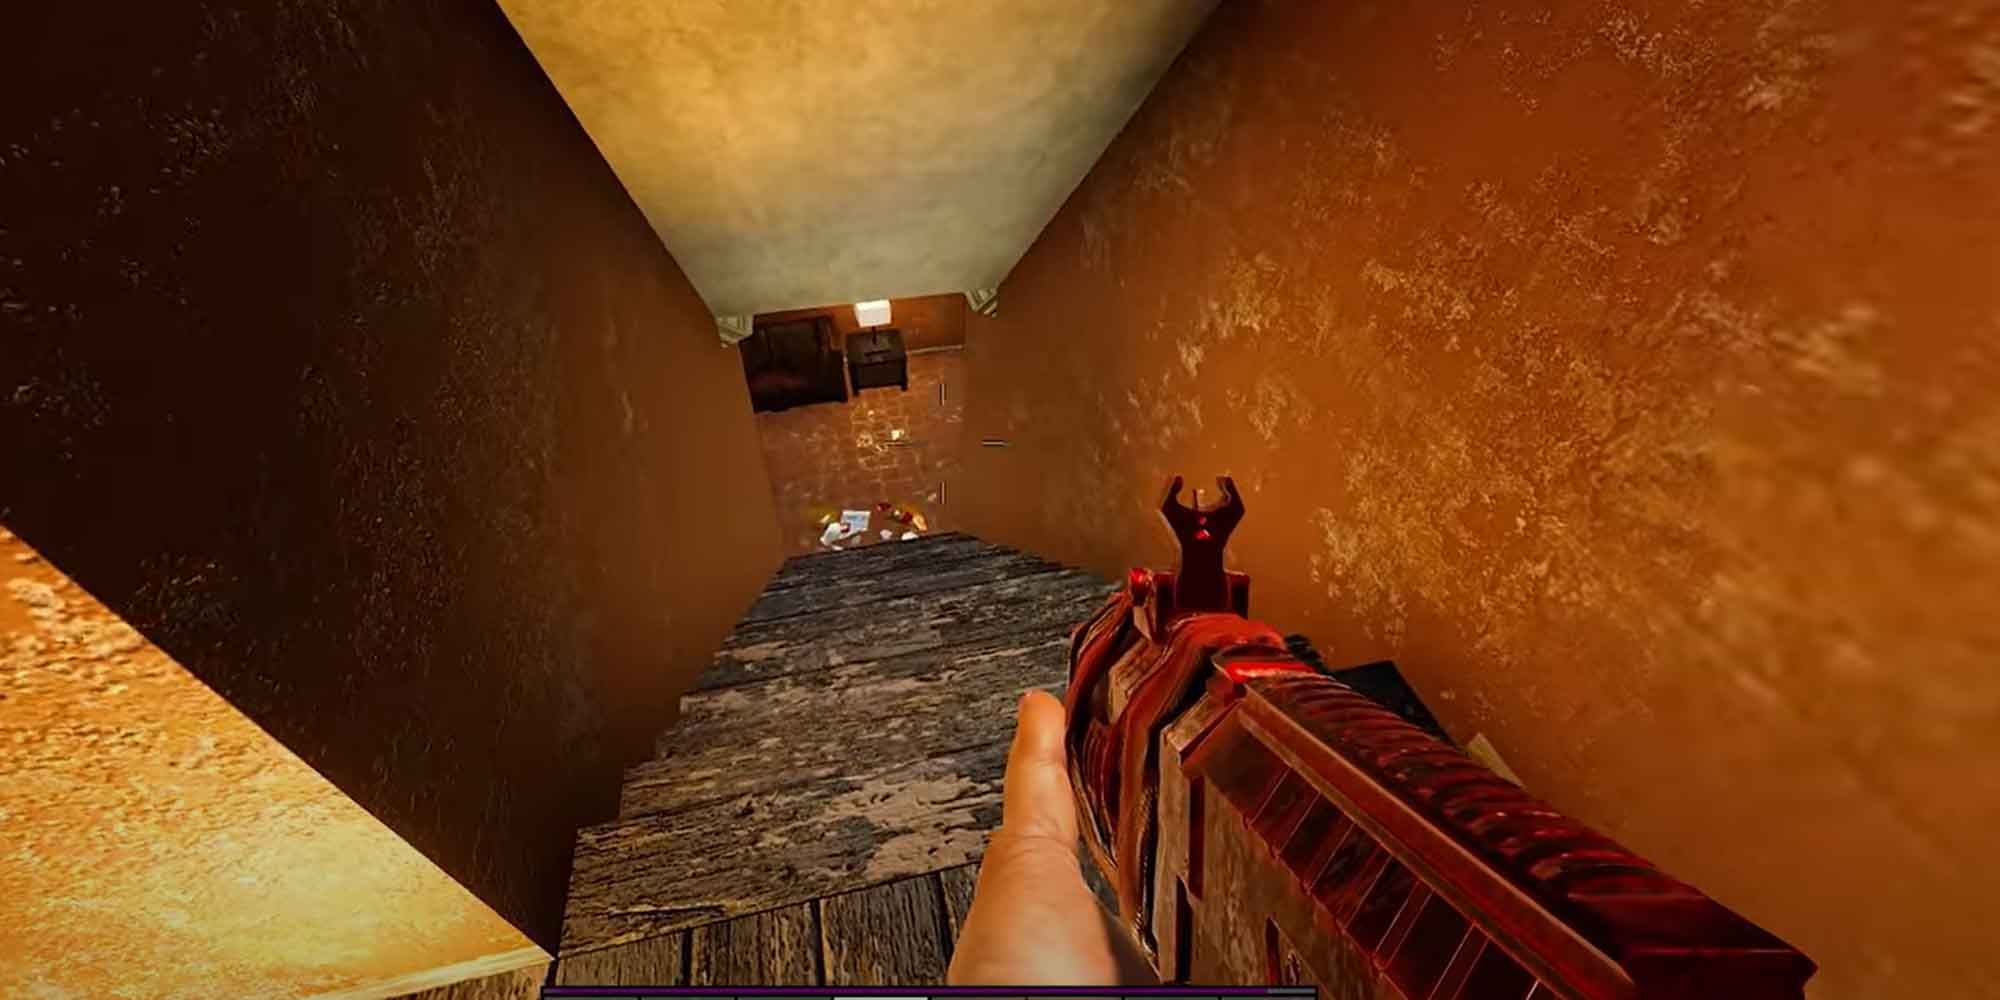 Staring down a stairwell with a Auto Shotgun in hand in 7 Days to Die